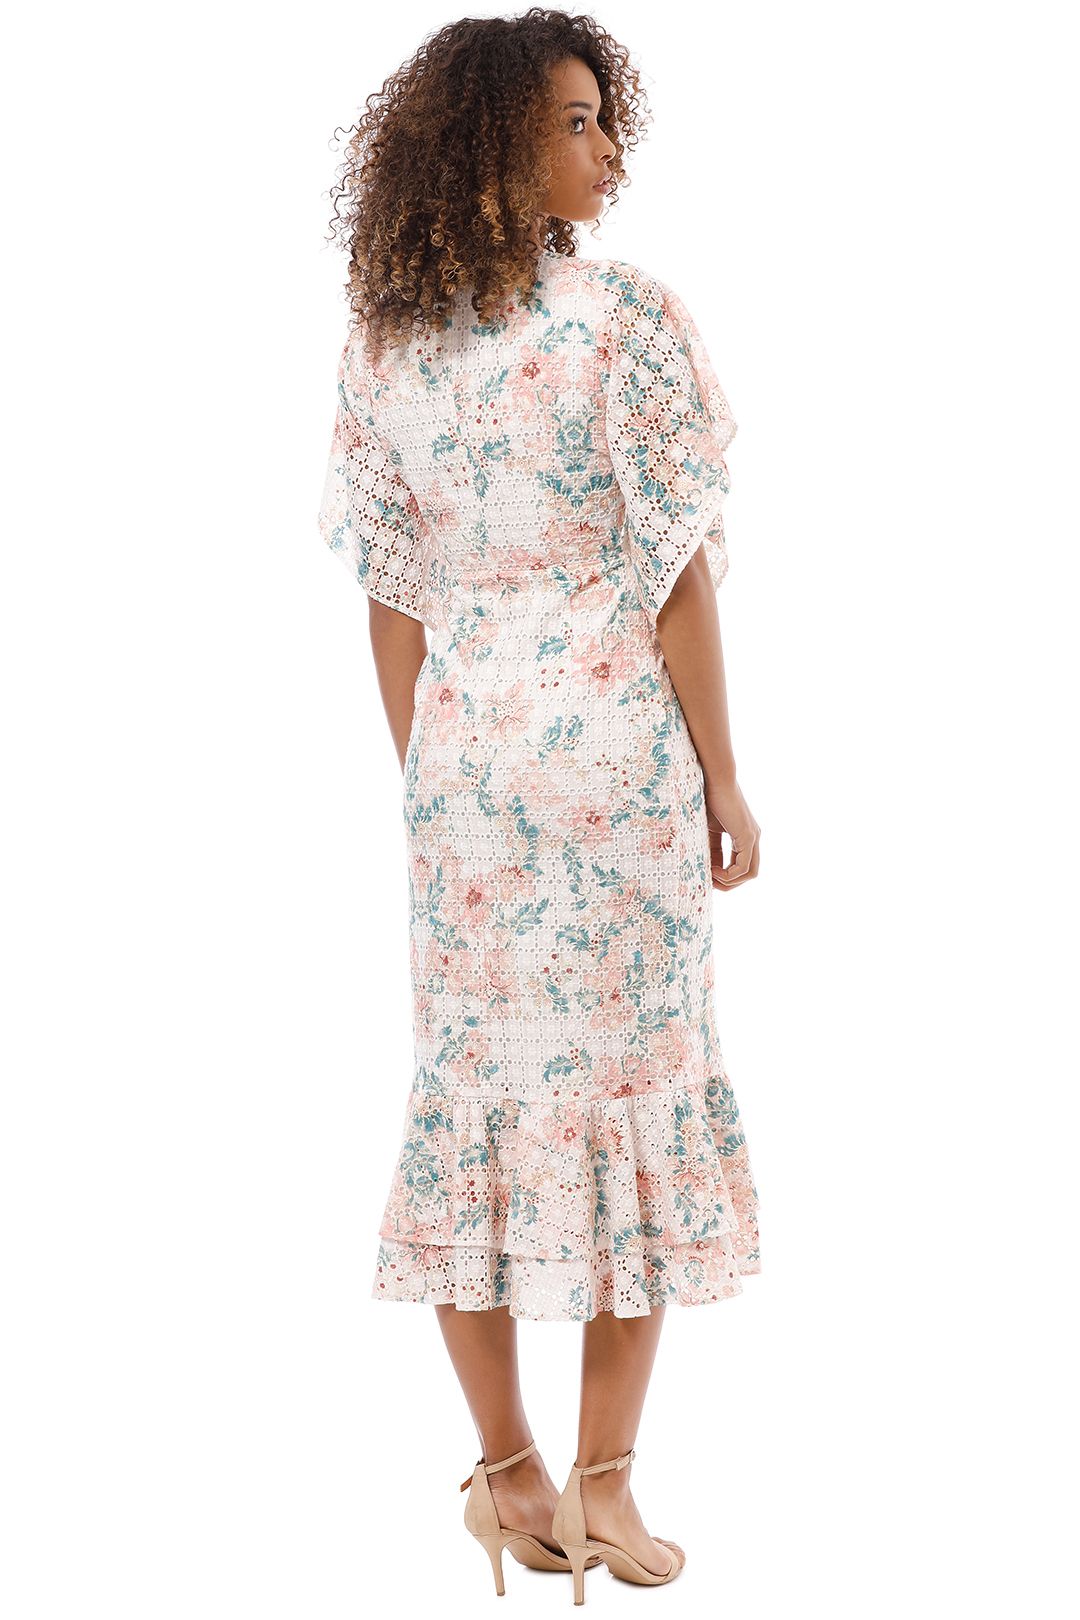 We Are Kindred - Valentine Tie Front Midi Dress - Pink - Back